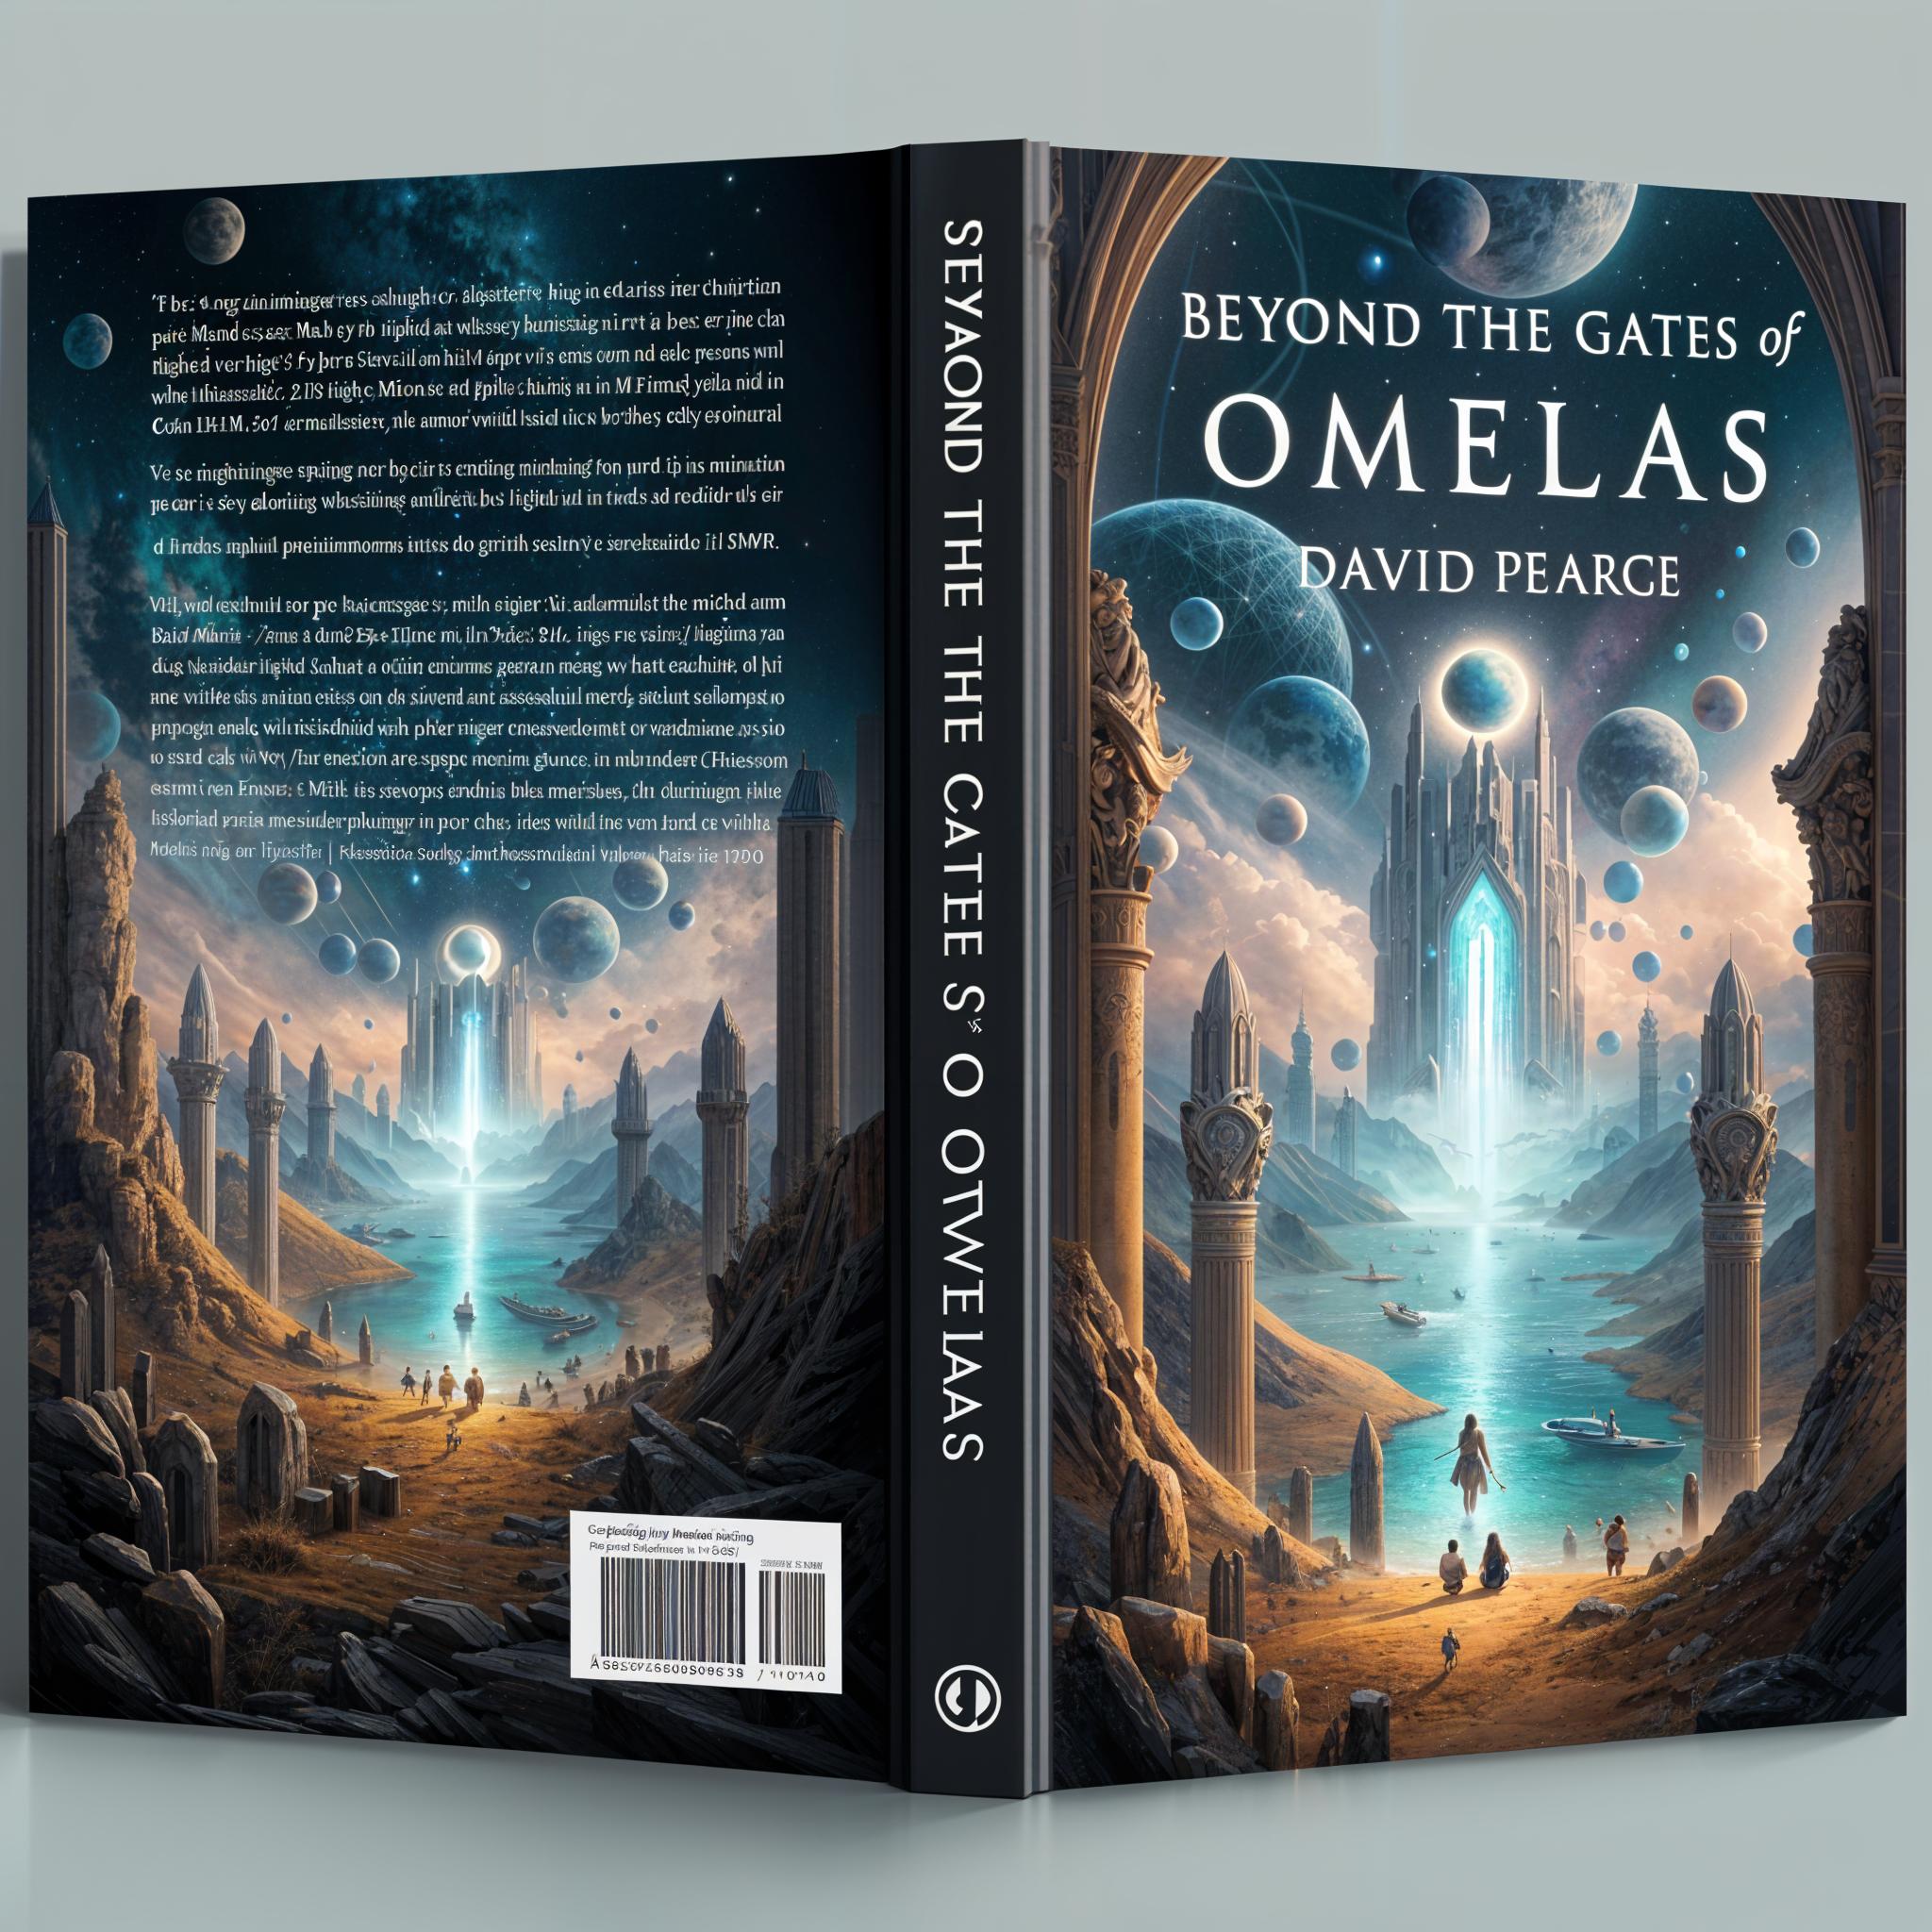 Beyond The Gates of Omelas by David Pearce